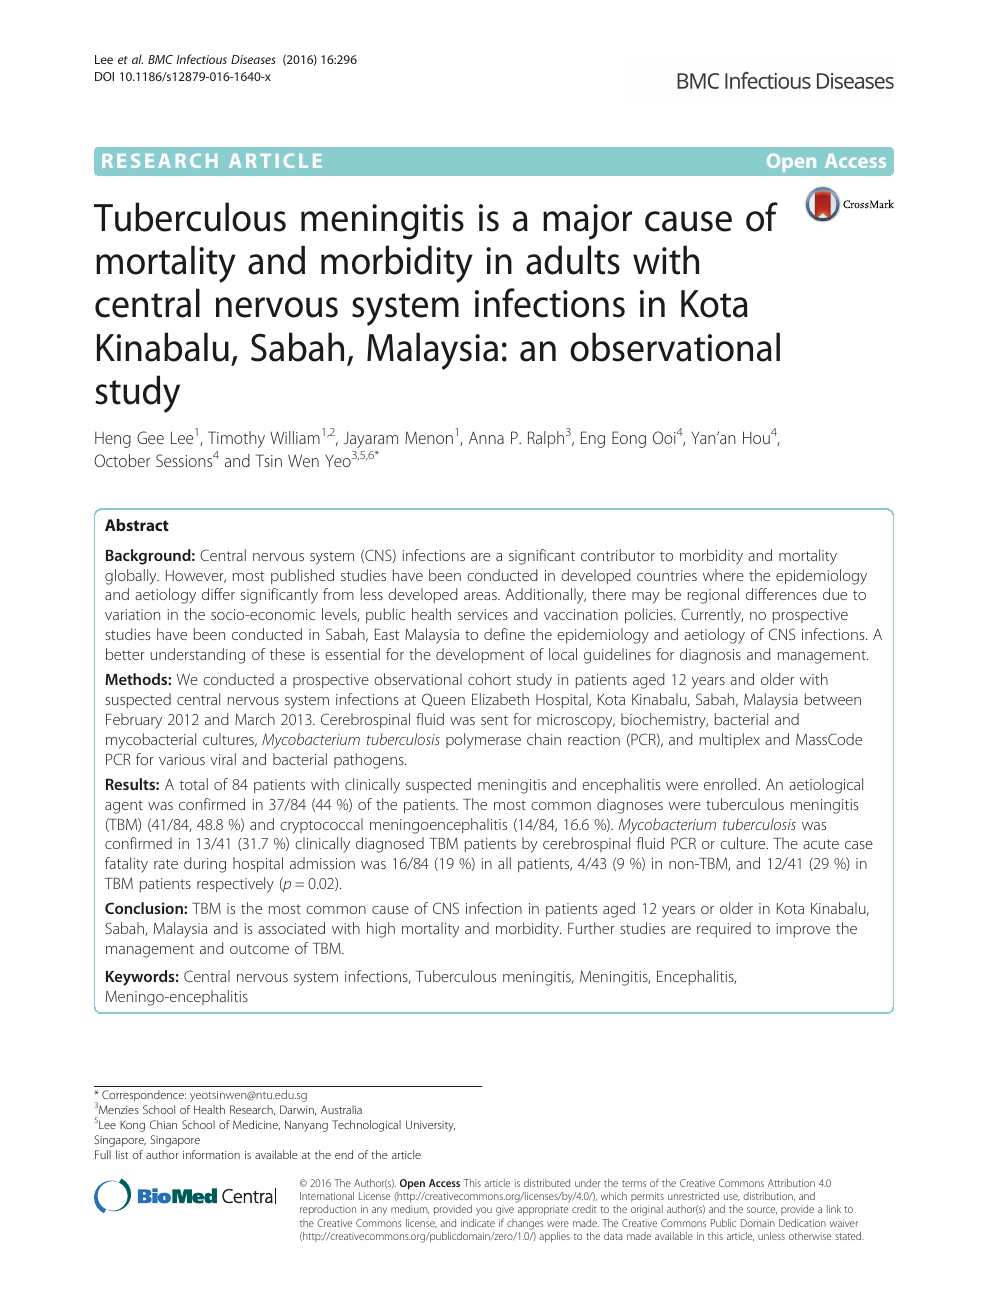 Tuberculous Meningitis Is A Major Cause Of Mortality And Morbidity In Adults With Central Nervous System Infections In Kota Kinabalu Sabah Malaysia An Observational Study Topic Of Research Paper In Health